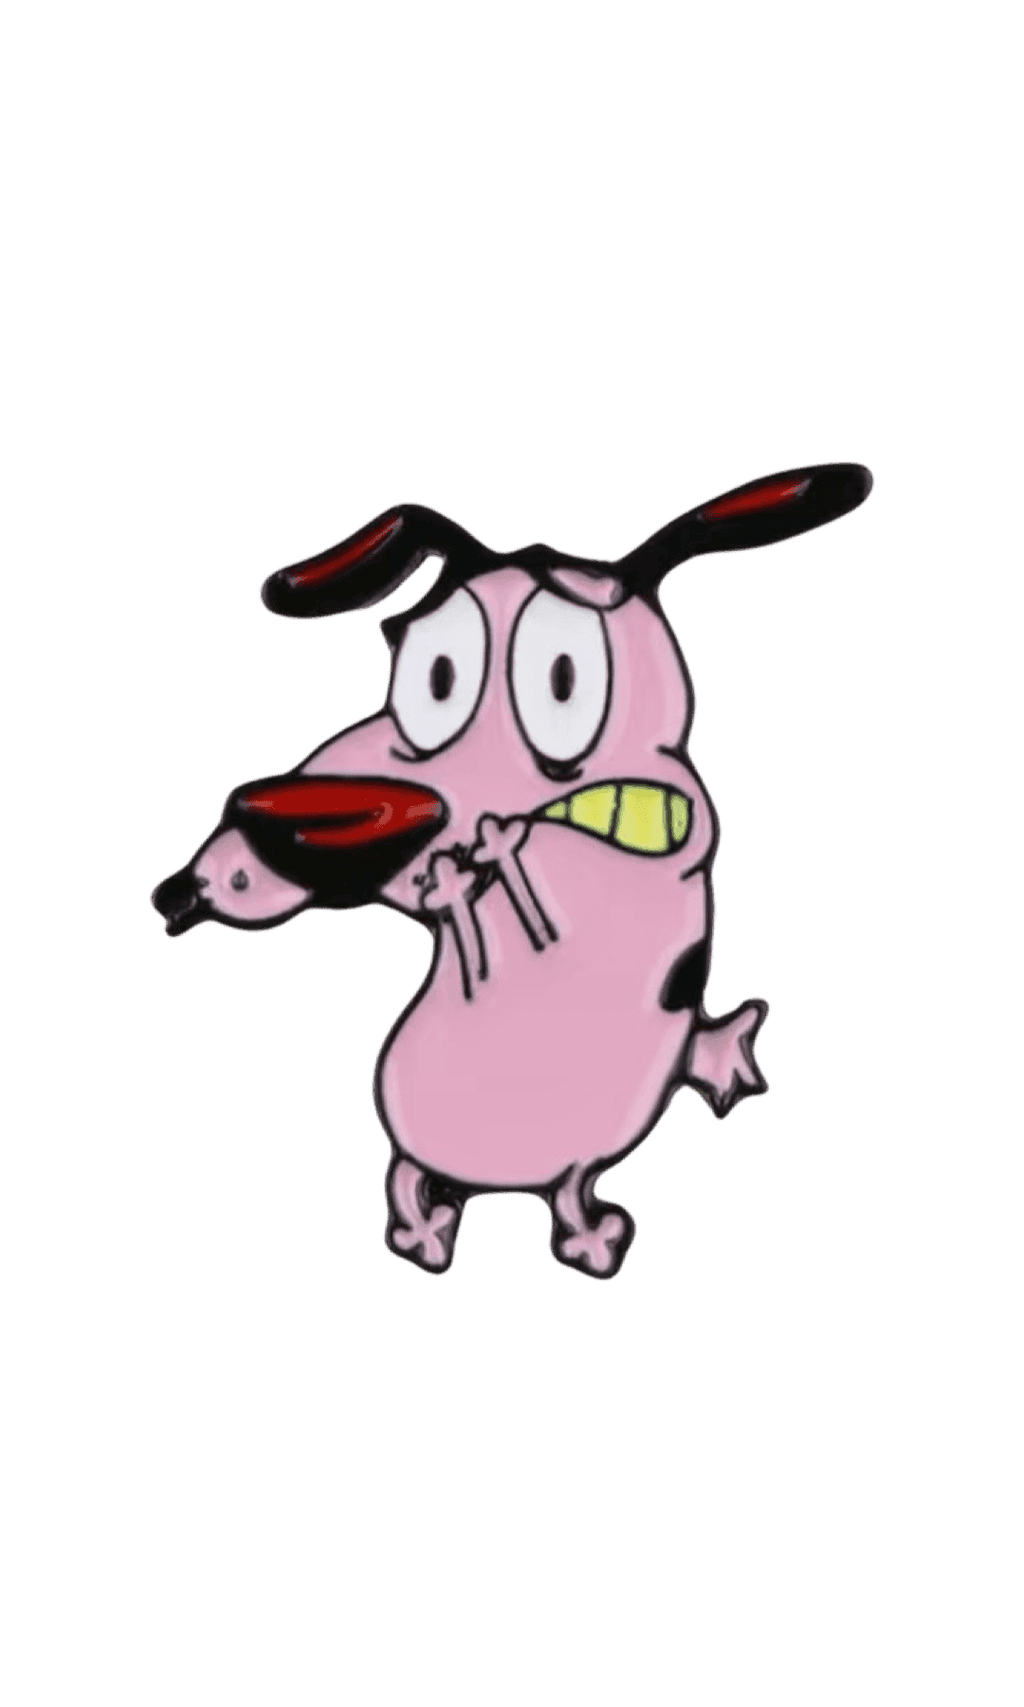 Courage the cowardly dog enamel brooch pin ☆